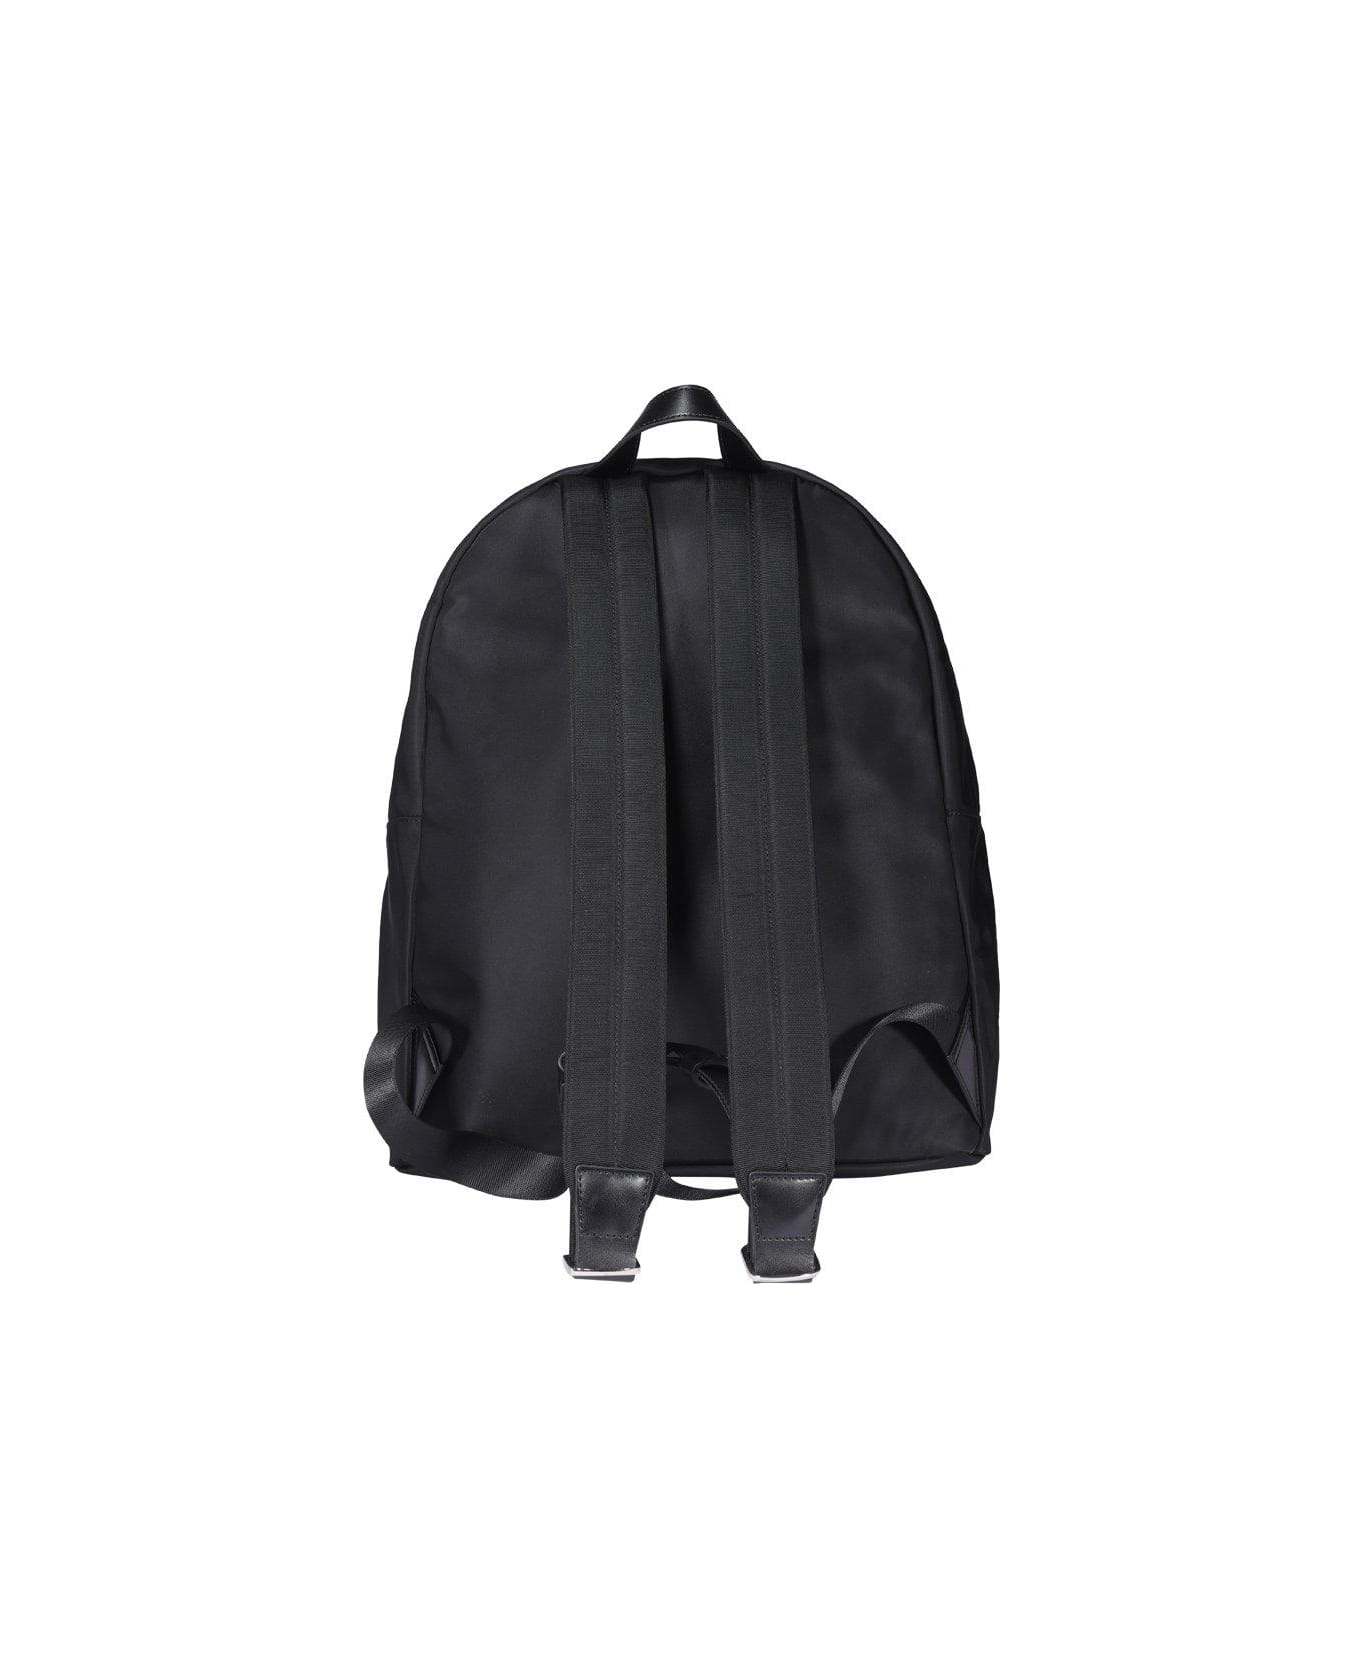 Dsquared2 Icon Logo Print Backpack - Nero バックパック